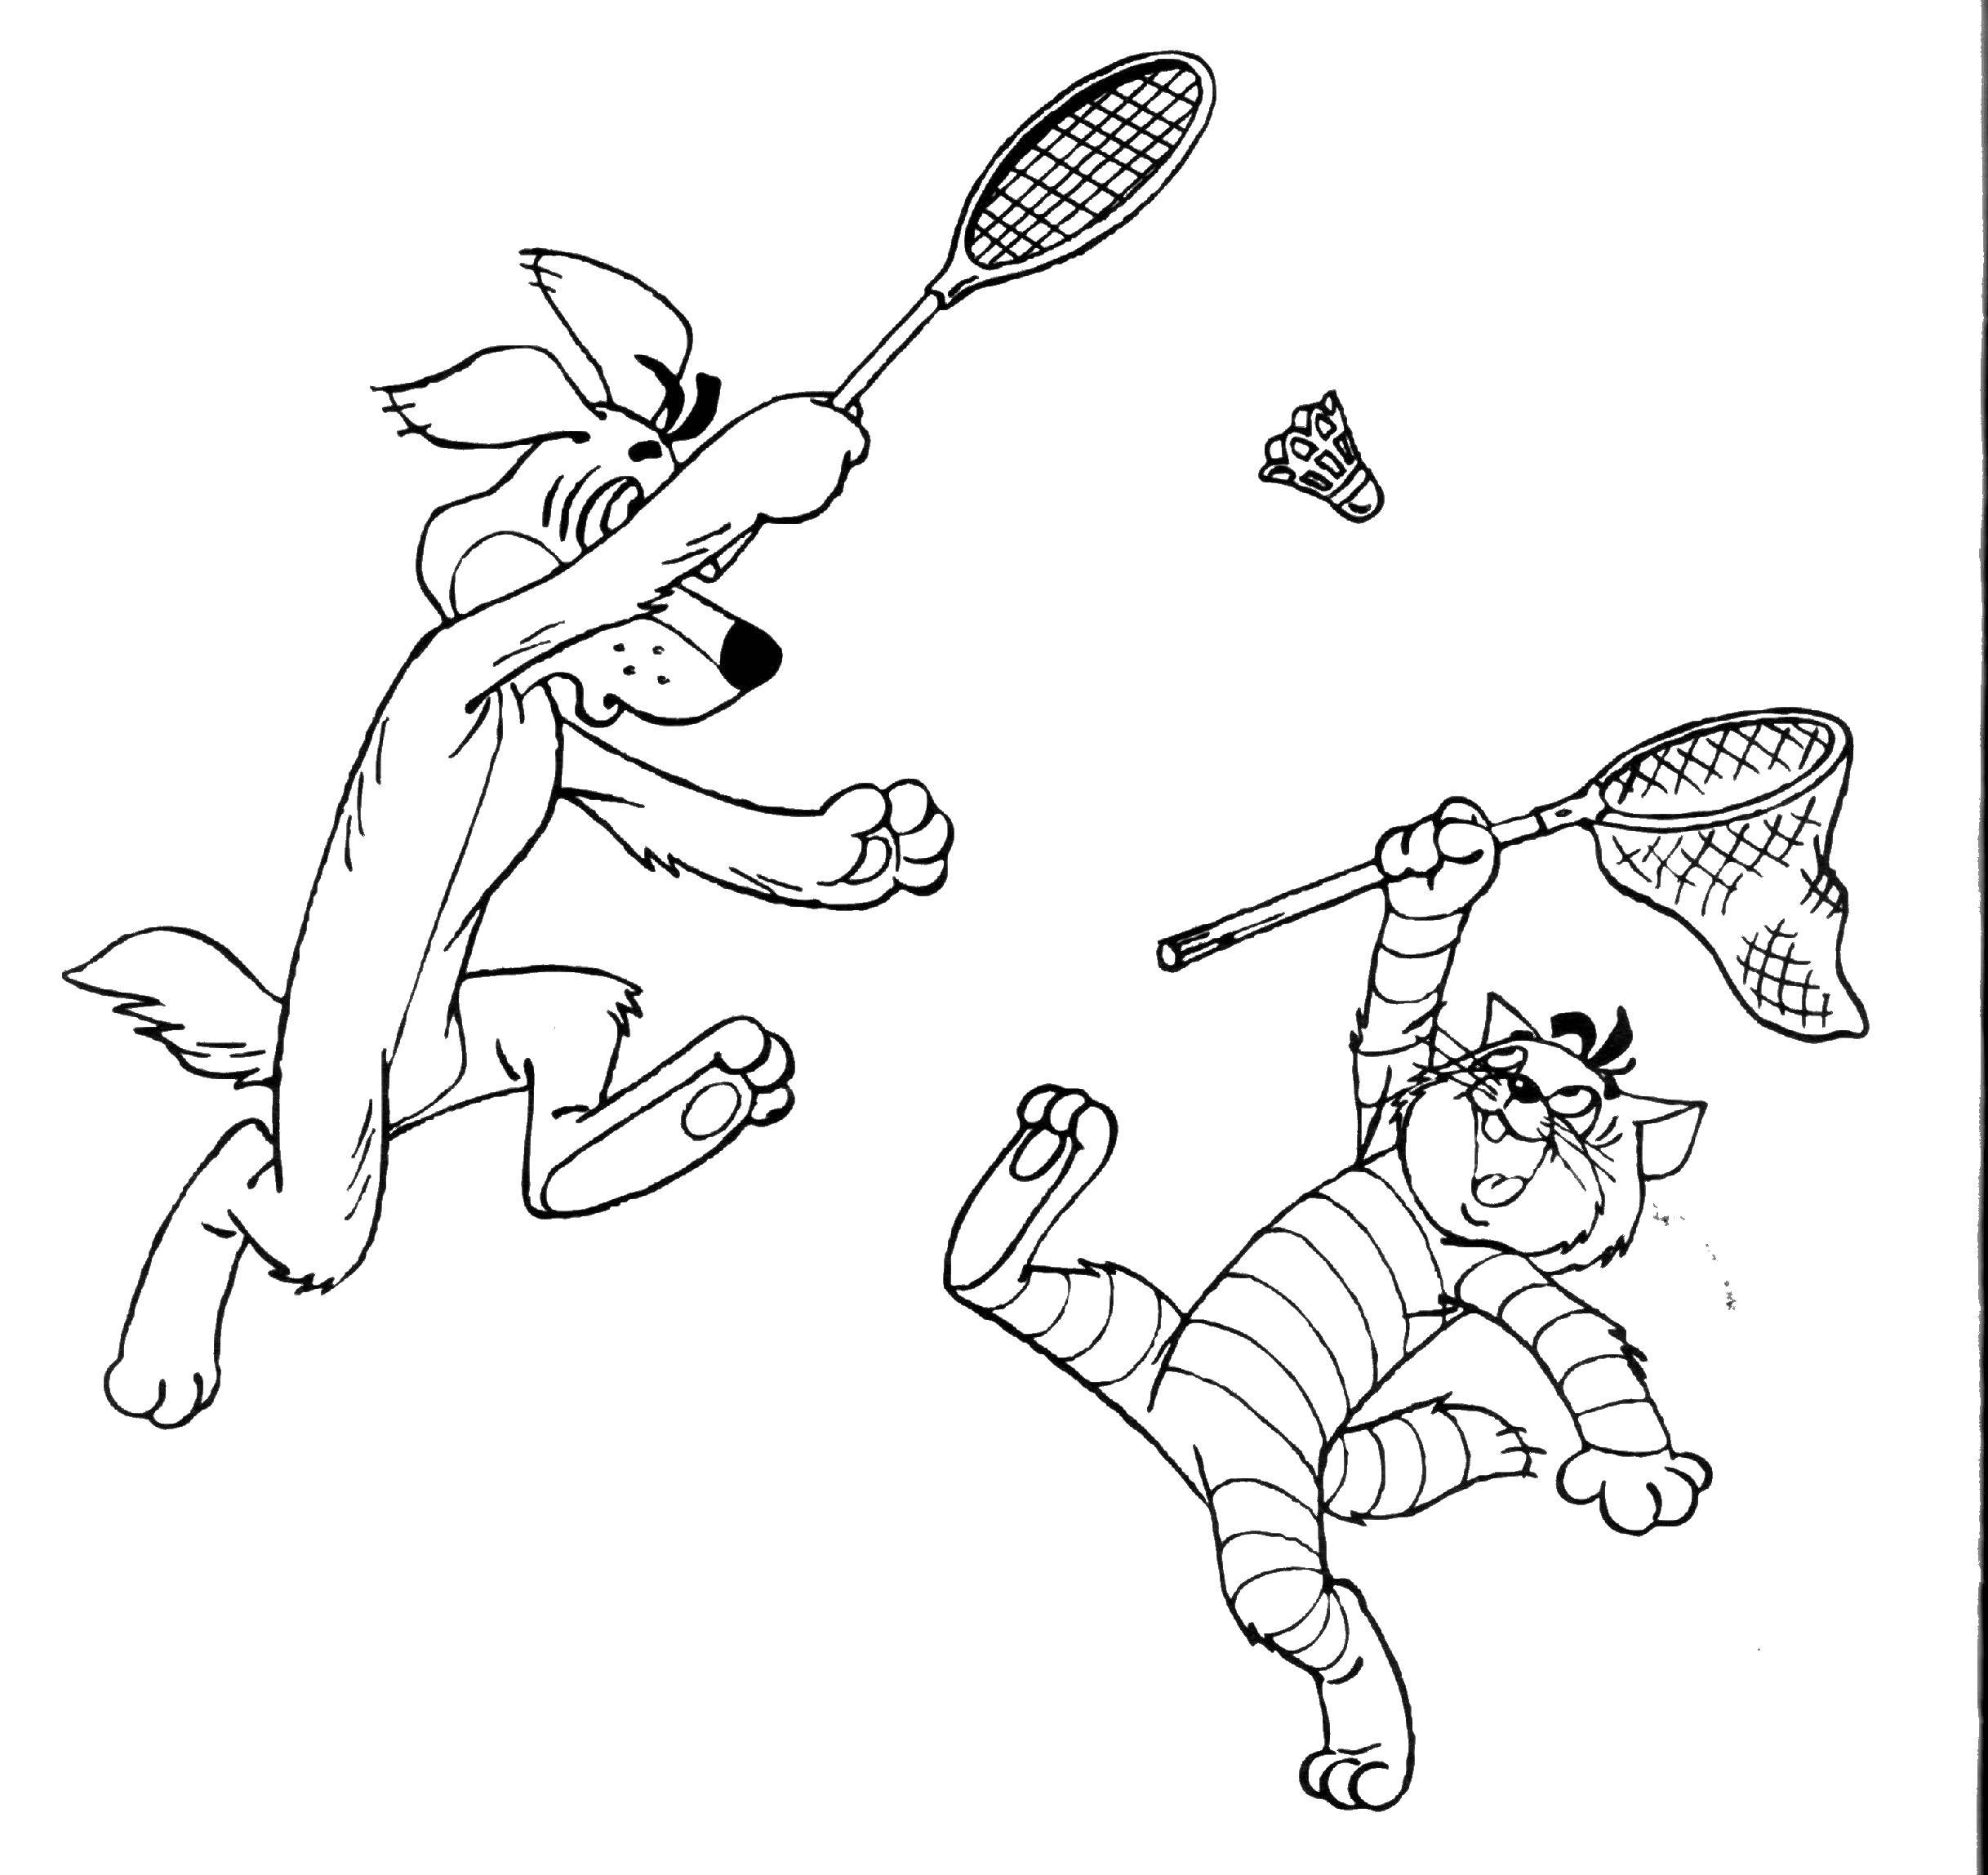 Coloring Dog and cat Matroskin. Category Characters cartoon. Tags:  cat, dog.